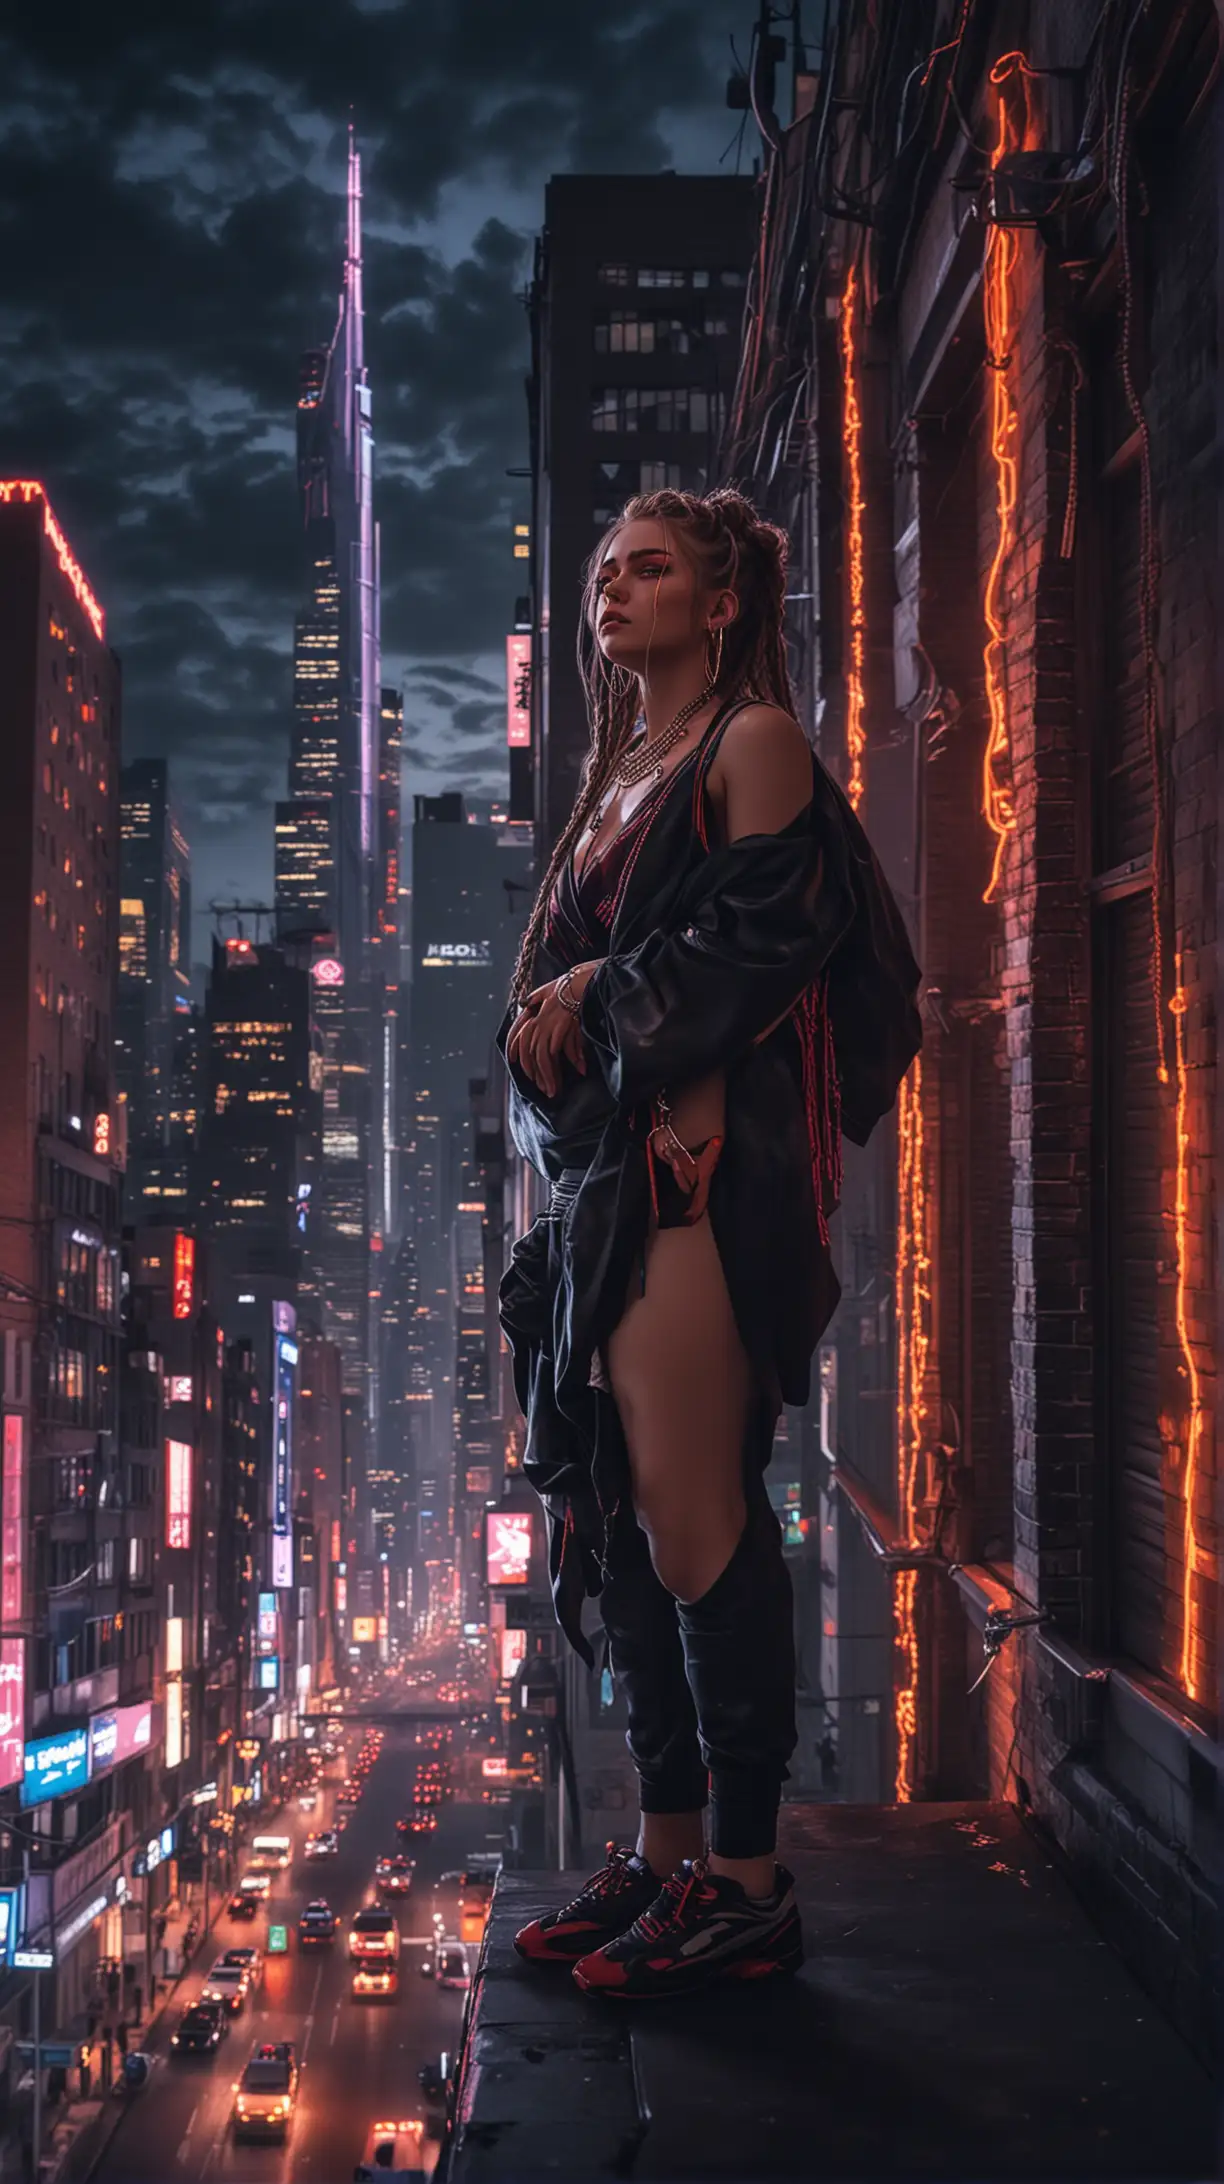 Urban Trap Artist with Braided Hair and Neon Lights